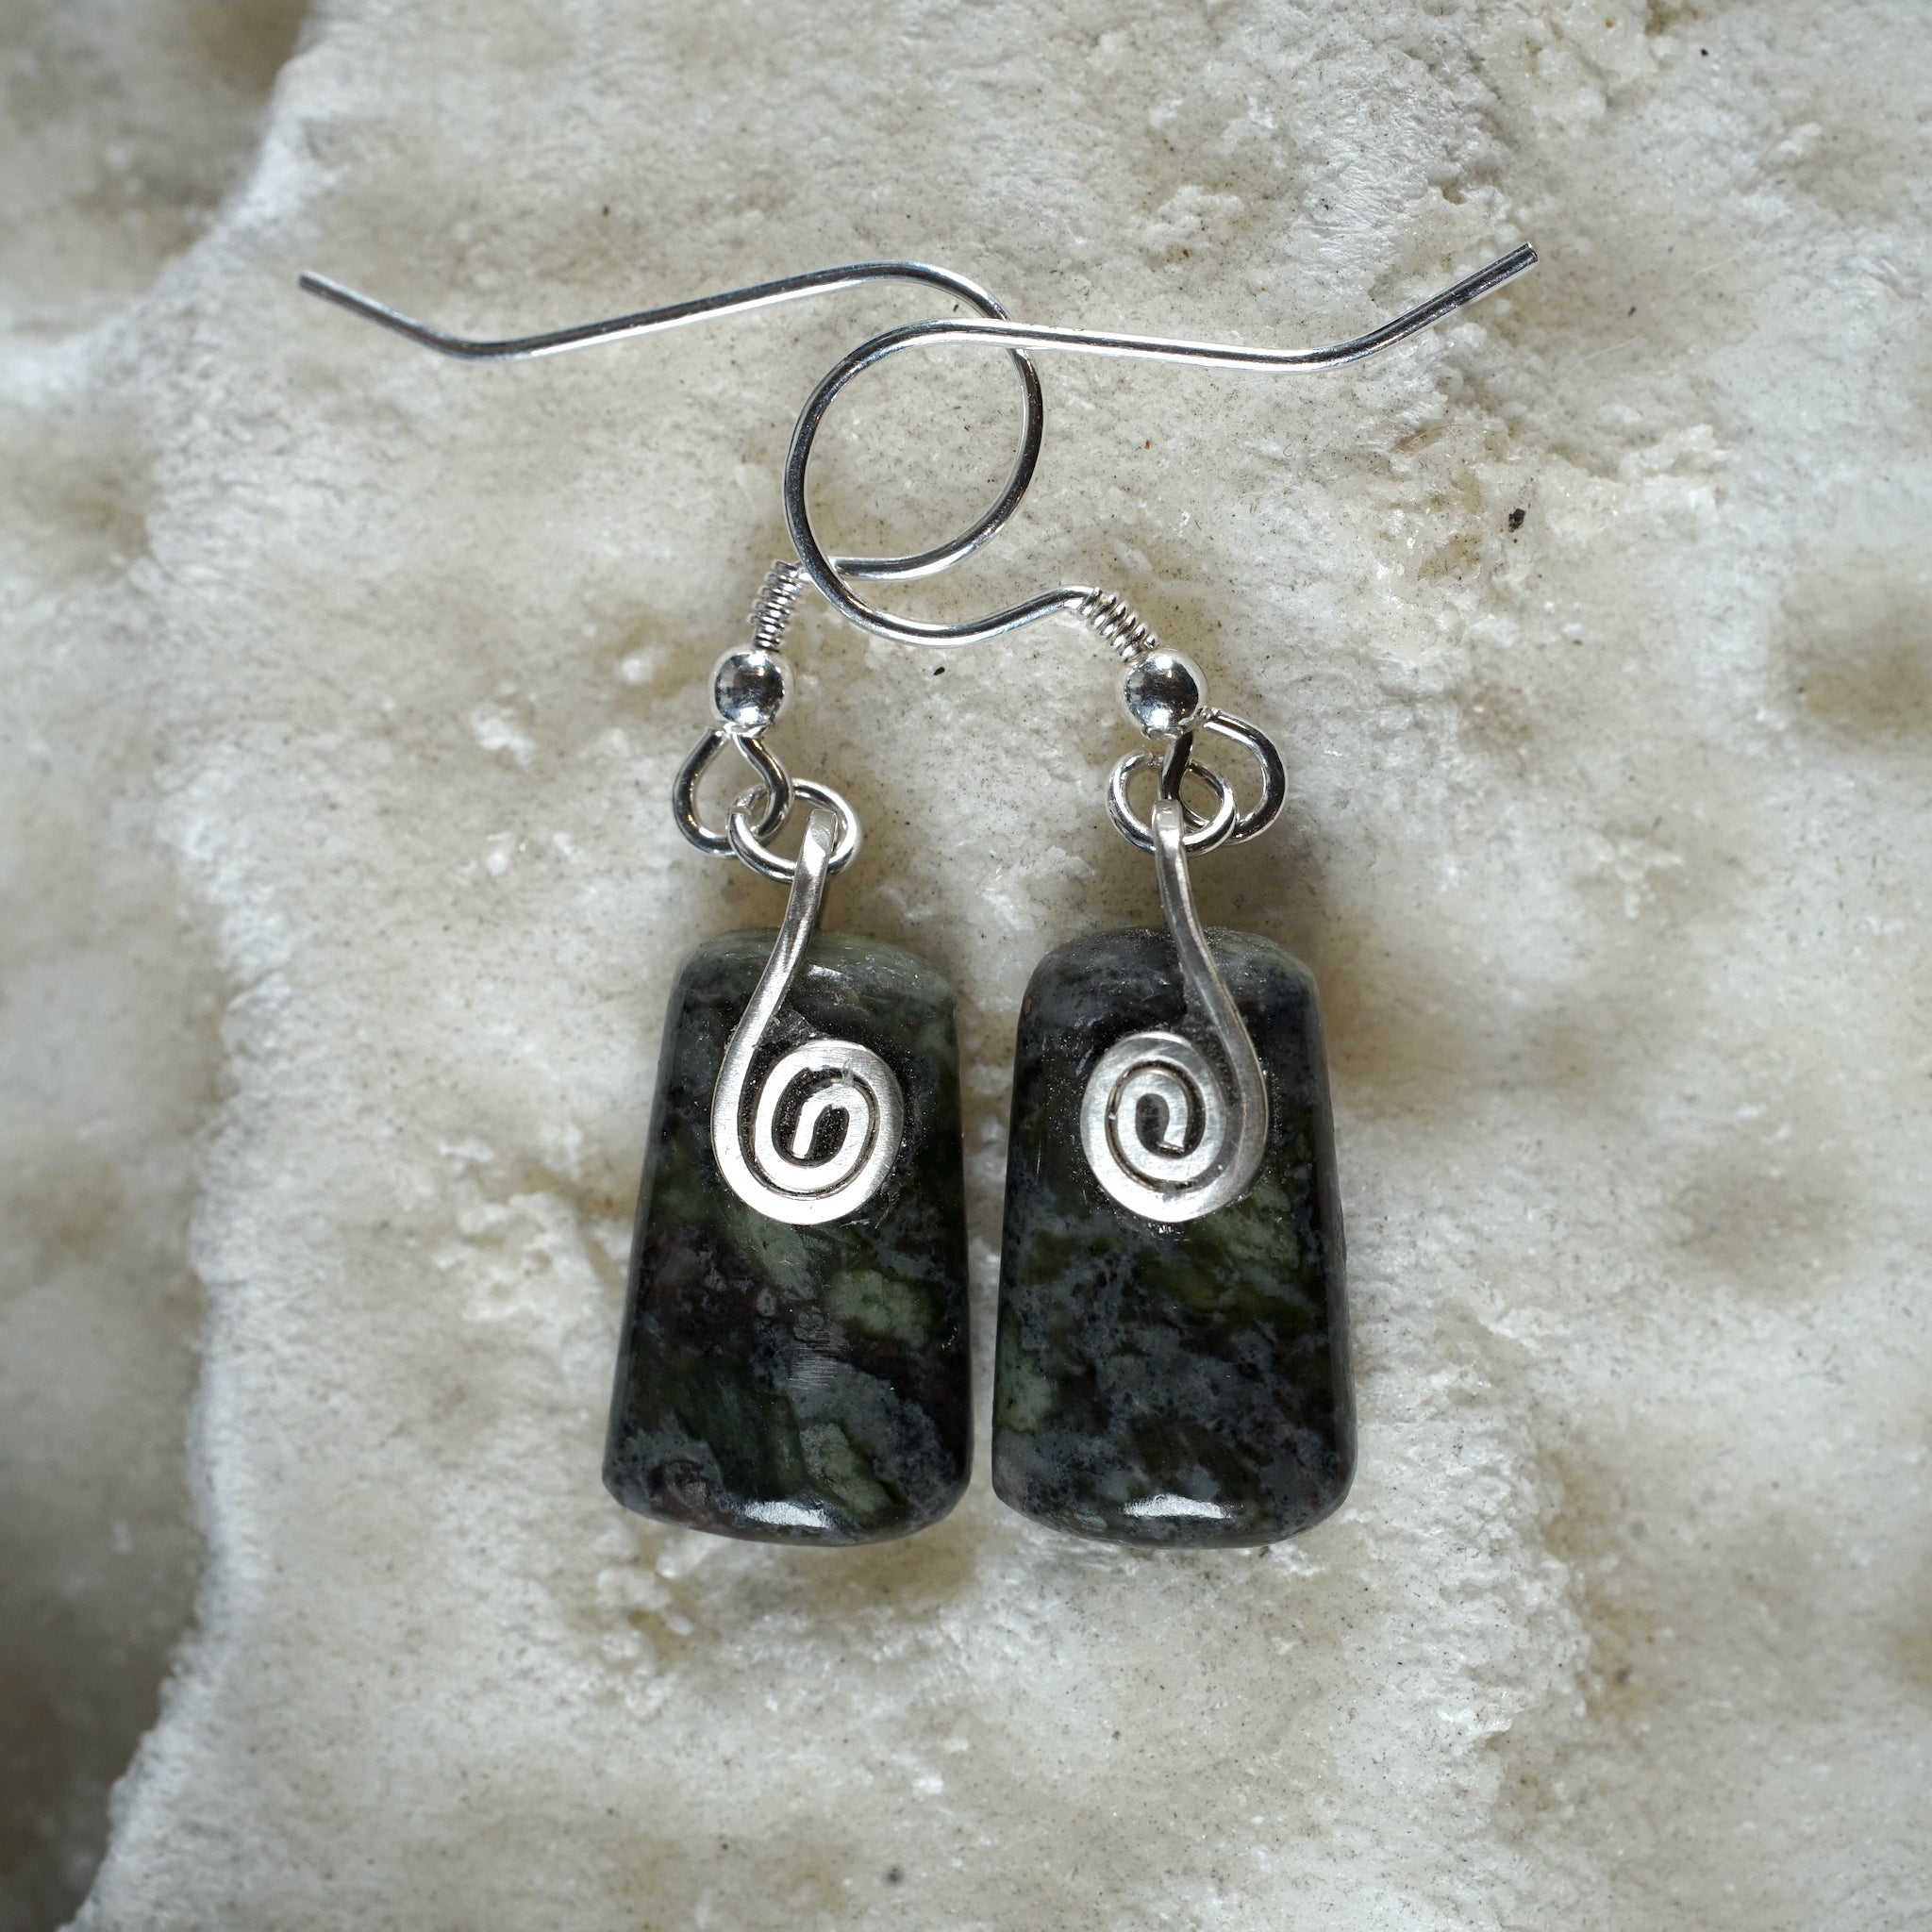 Connemara Marble small rectangle earrings with Sterling Silver Celtic Spirals from Angela Kelly Jewellery Enniskillen Fermanagh